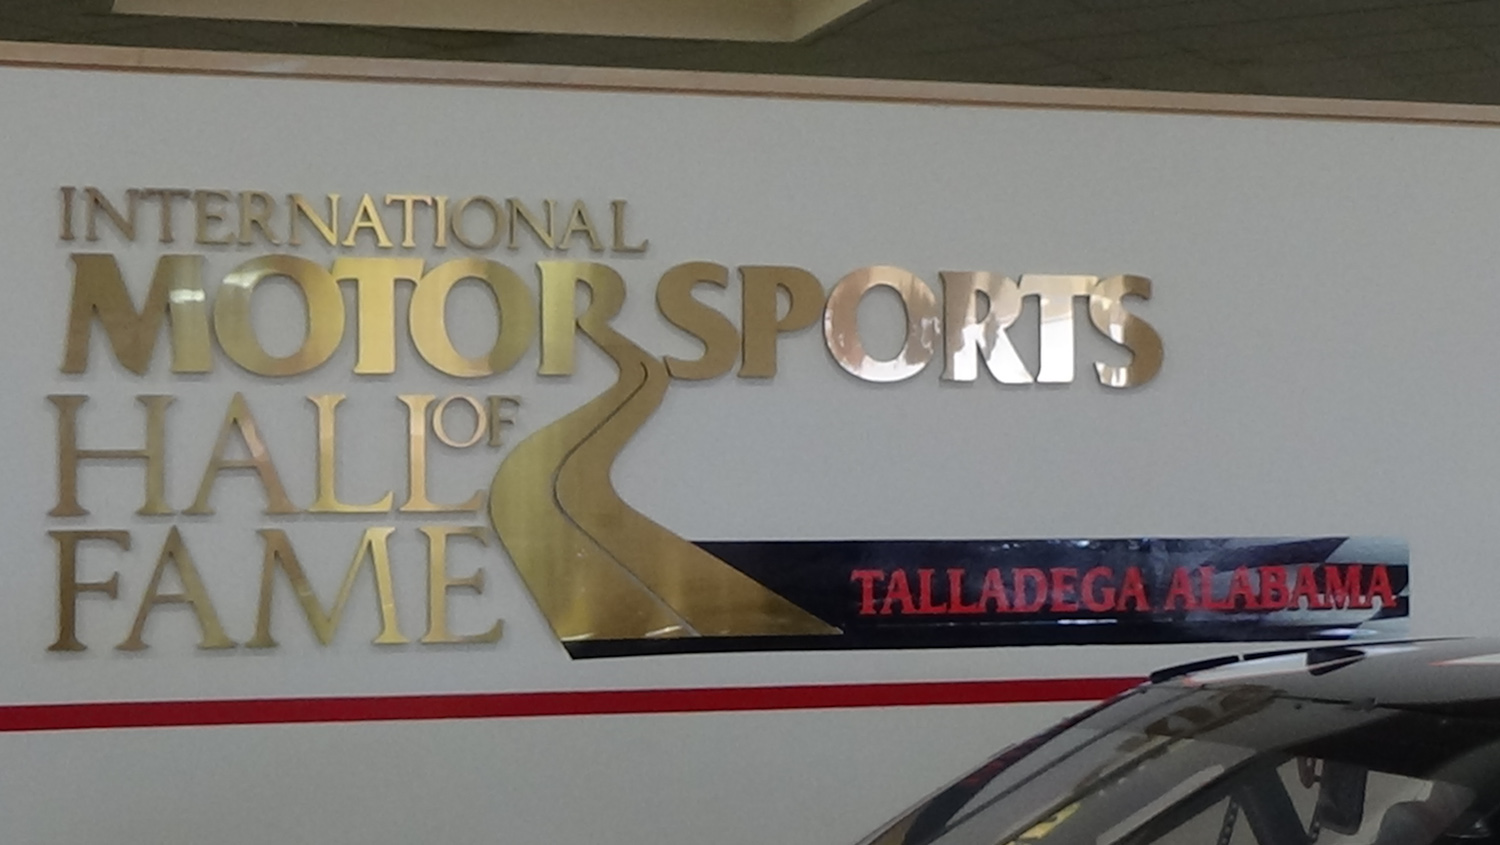 Motor sports Hall of Fame-